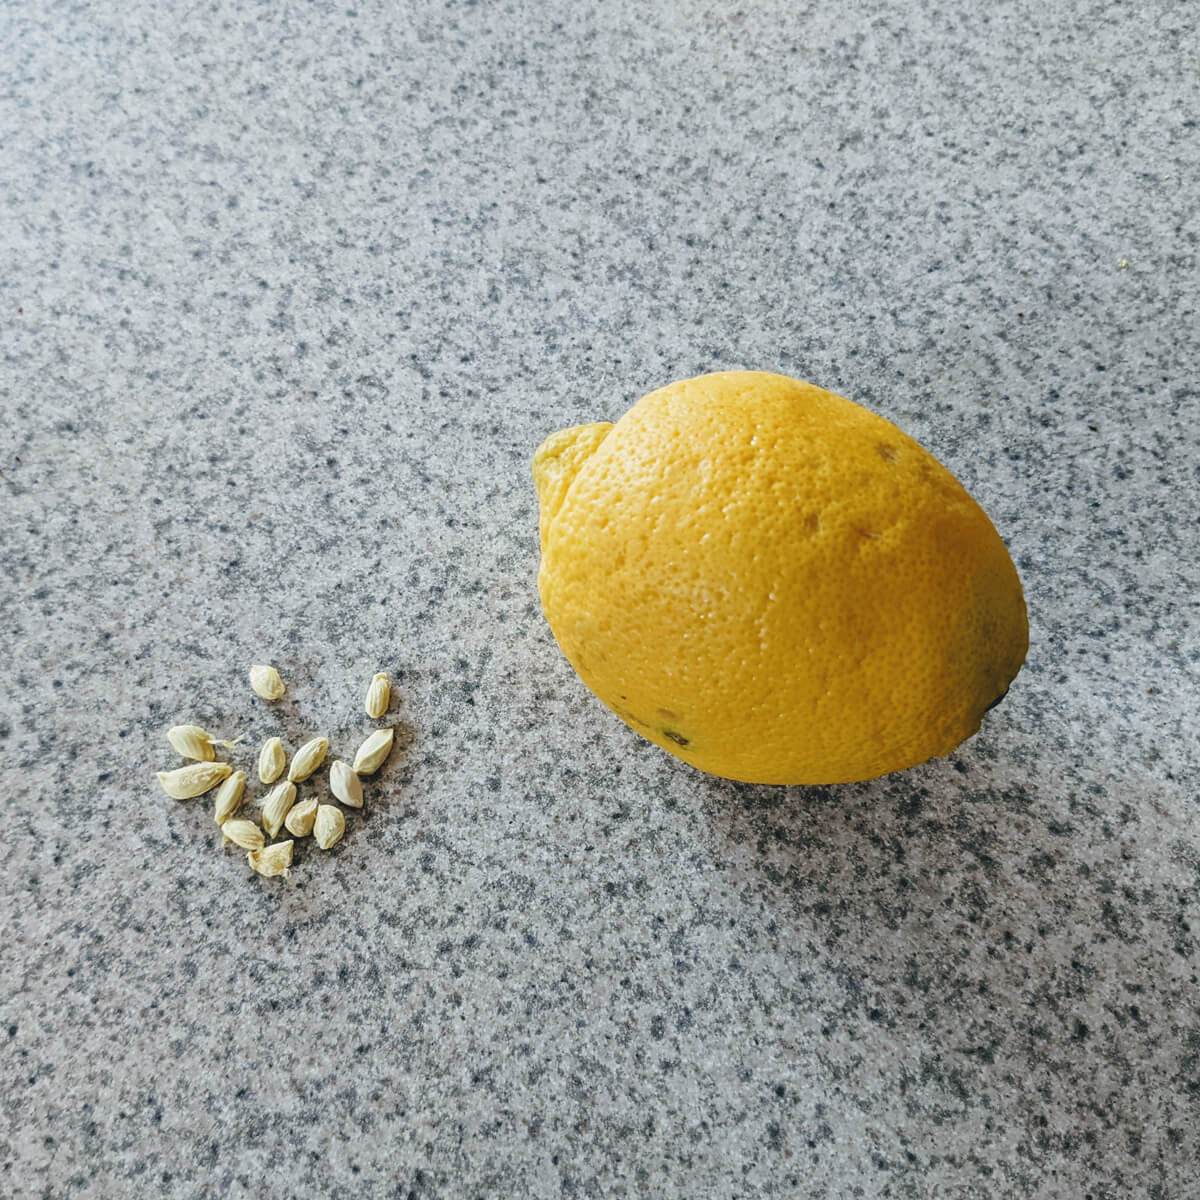 How to Germinate Lemon Seeds - Harvest Seeds from a Lemon